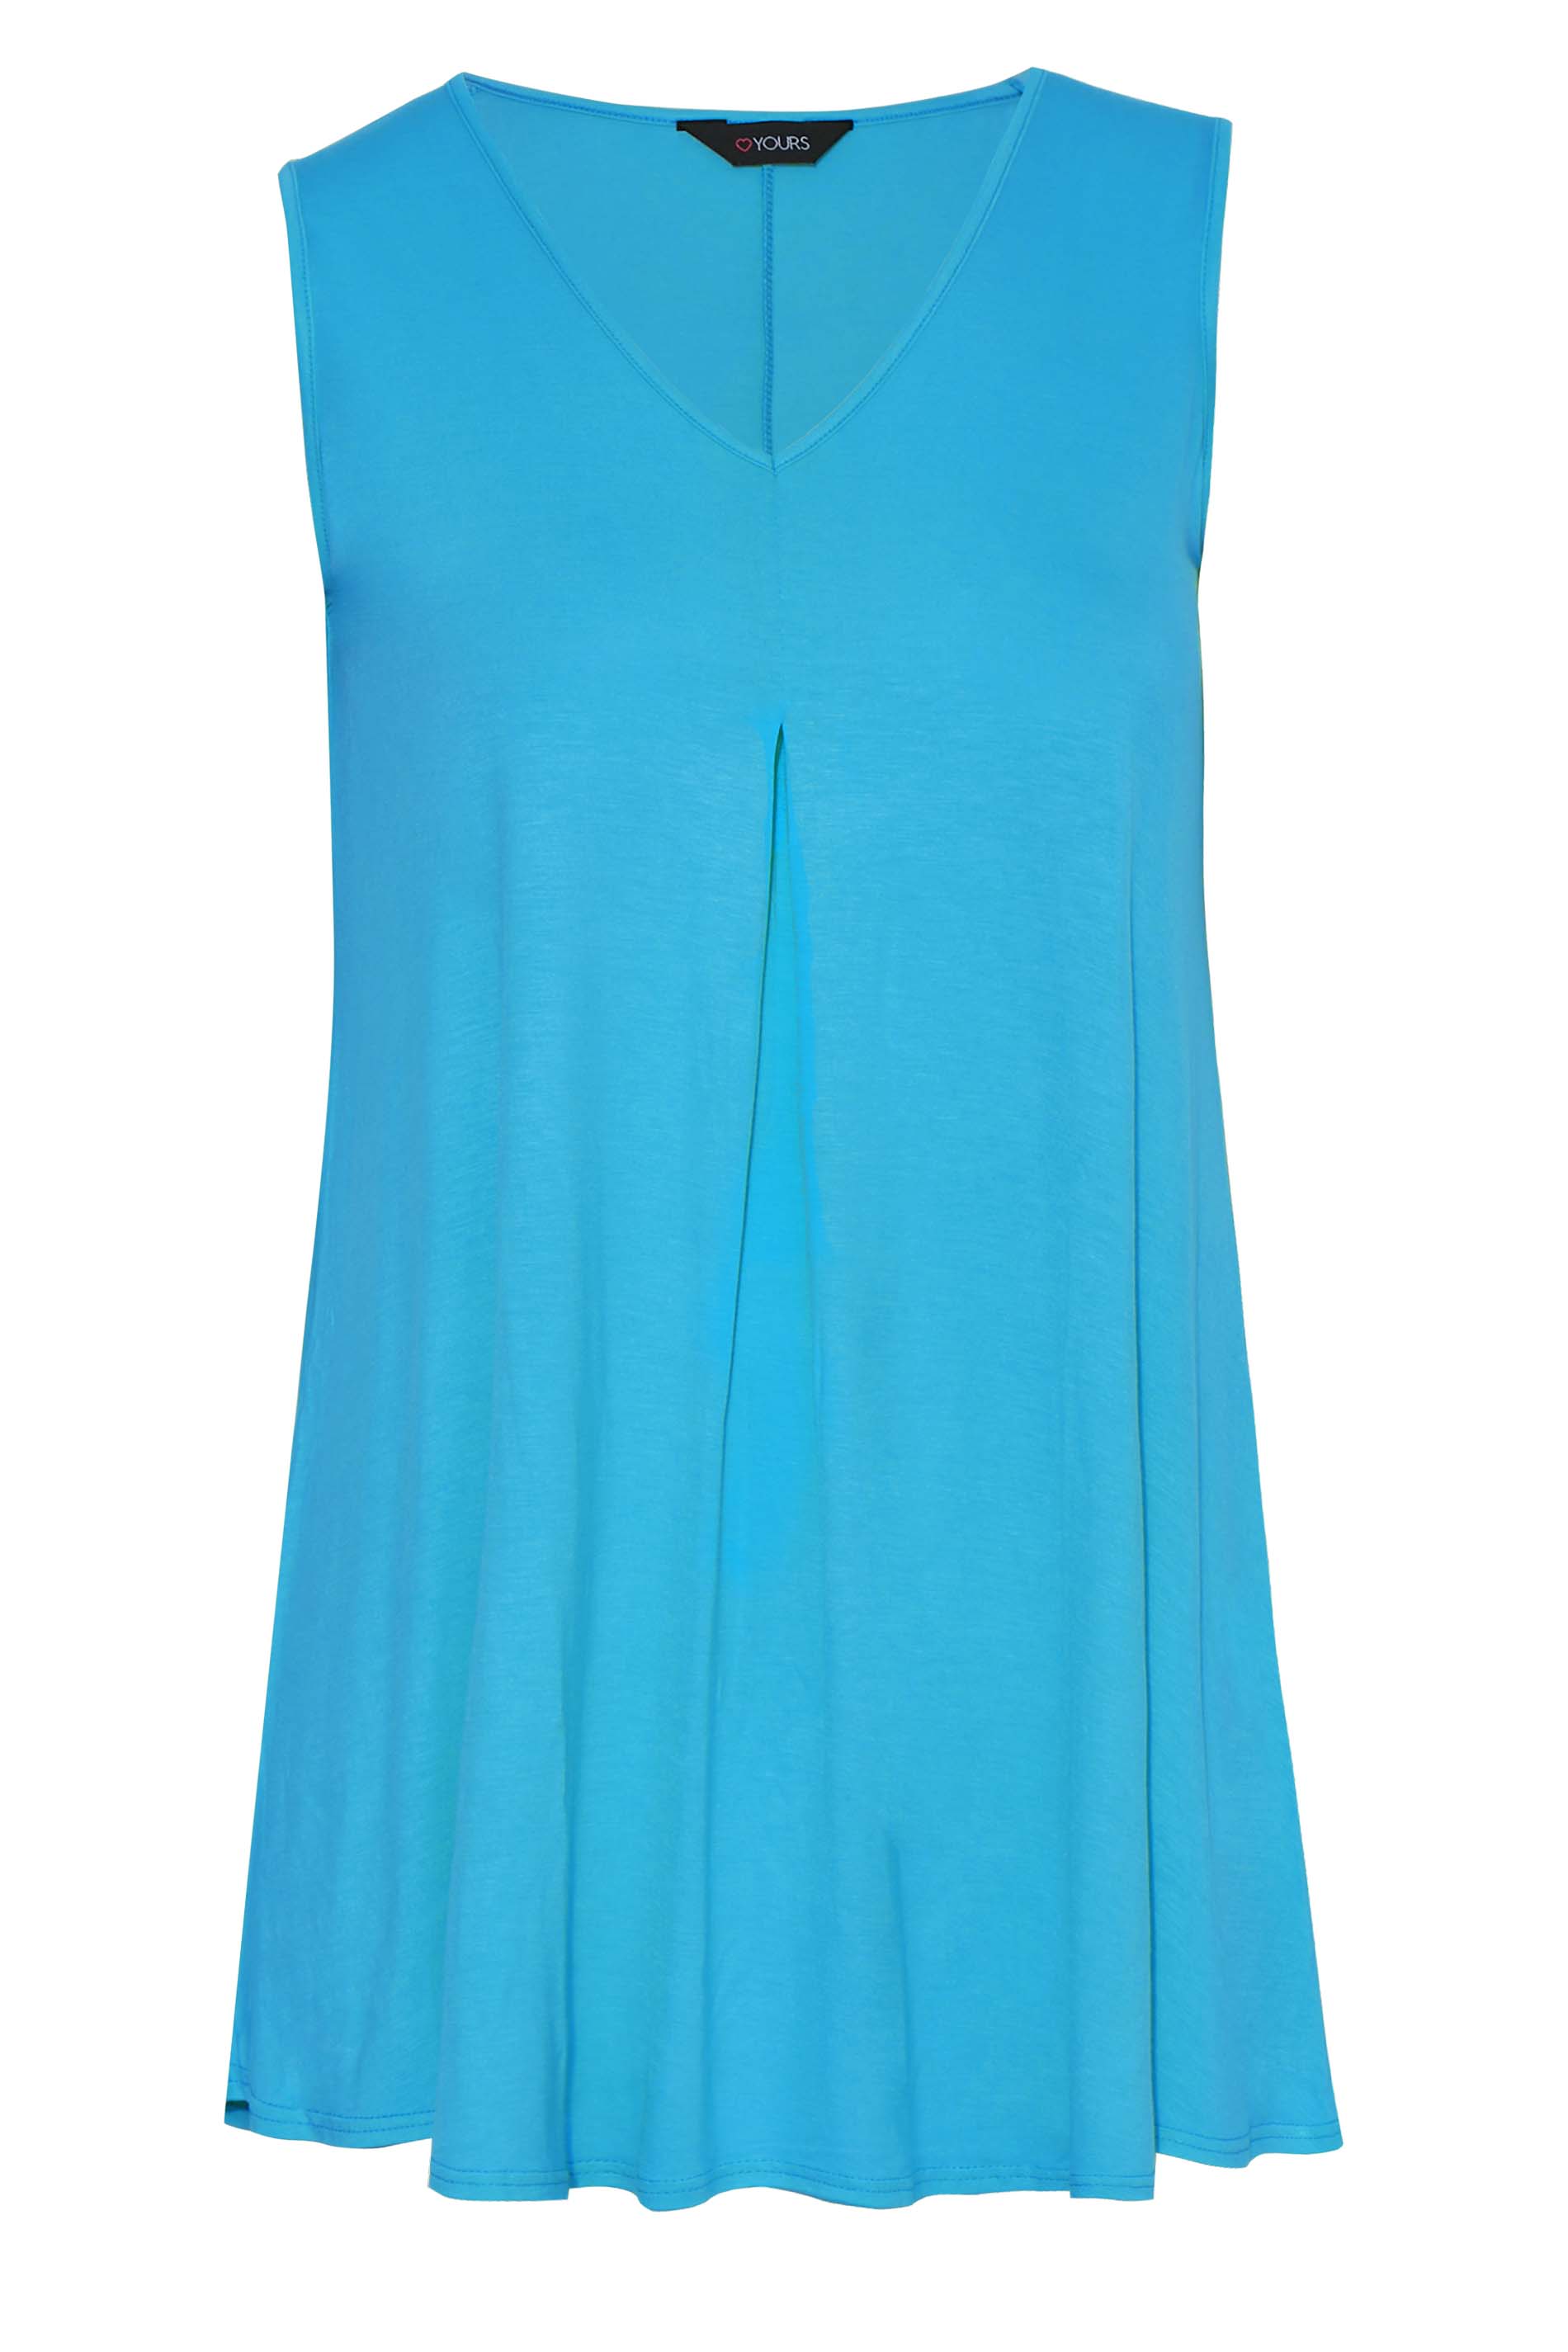 Grande taille  Tops Grande taille  Tops Casual | Curve Turquoise Blue Swing Vest Top - EK95463